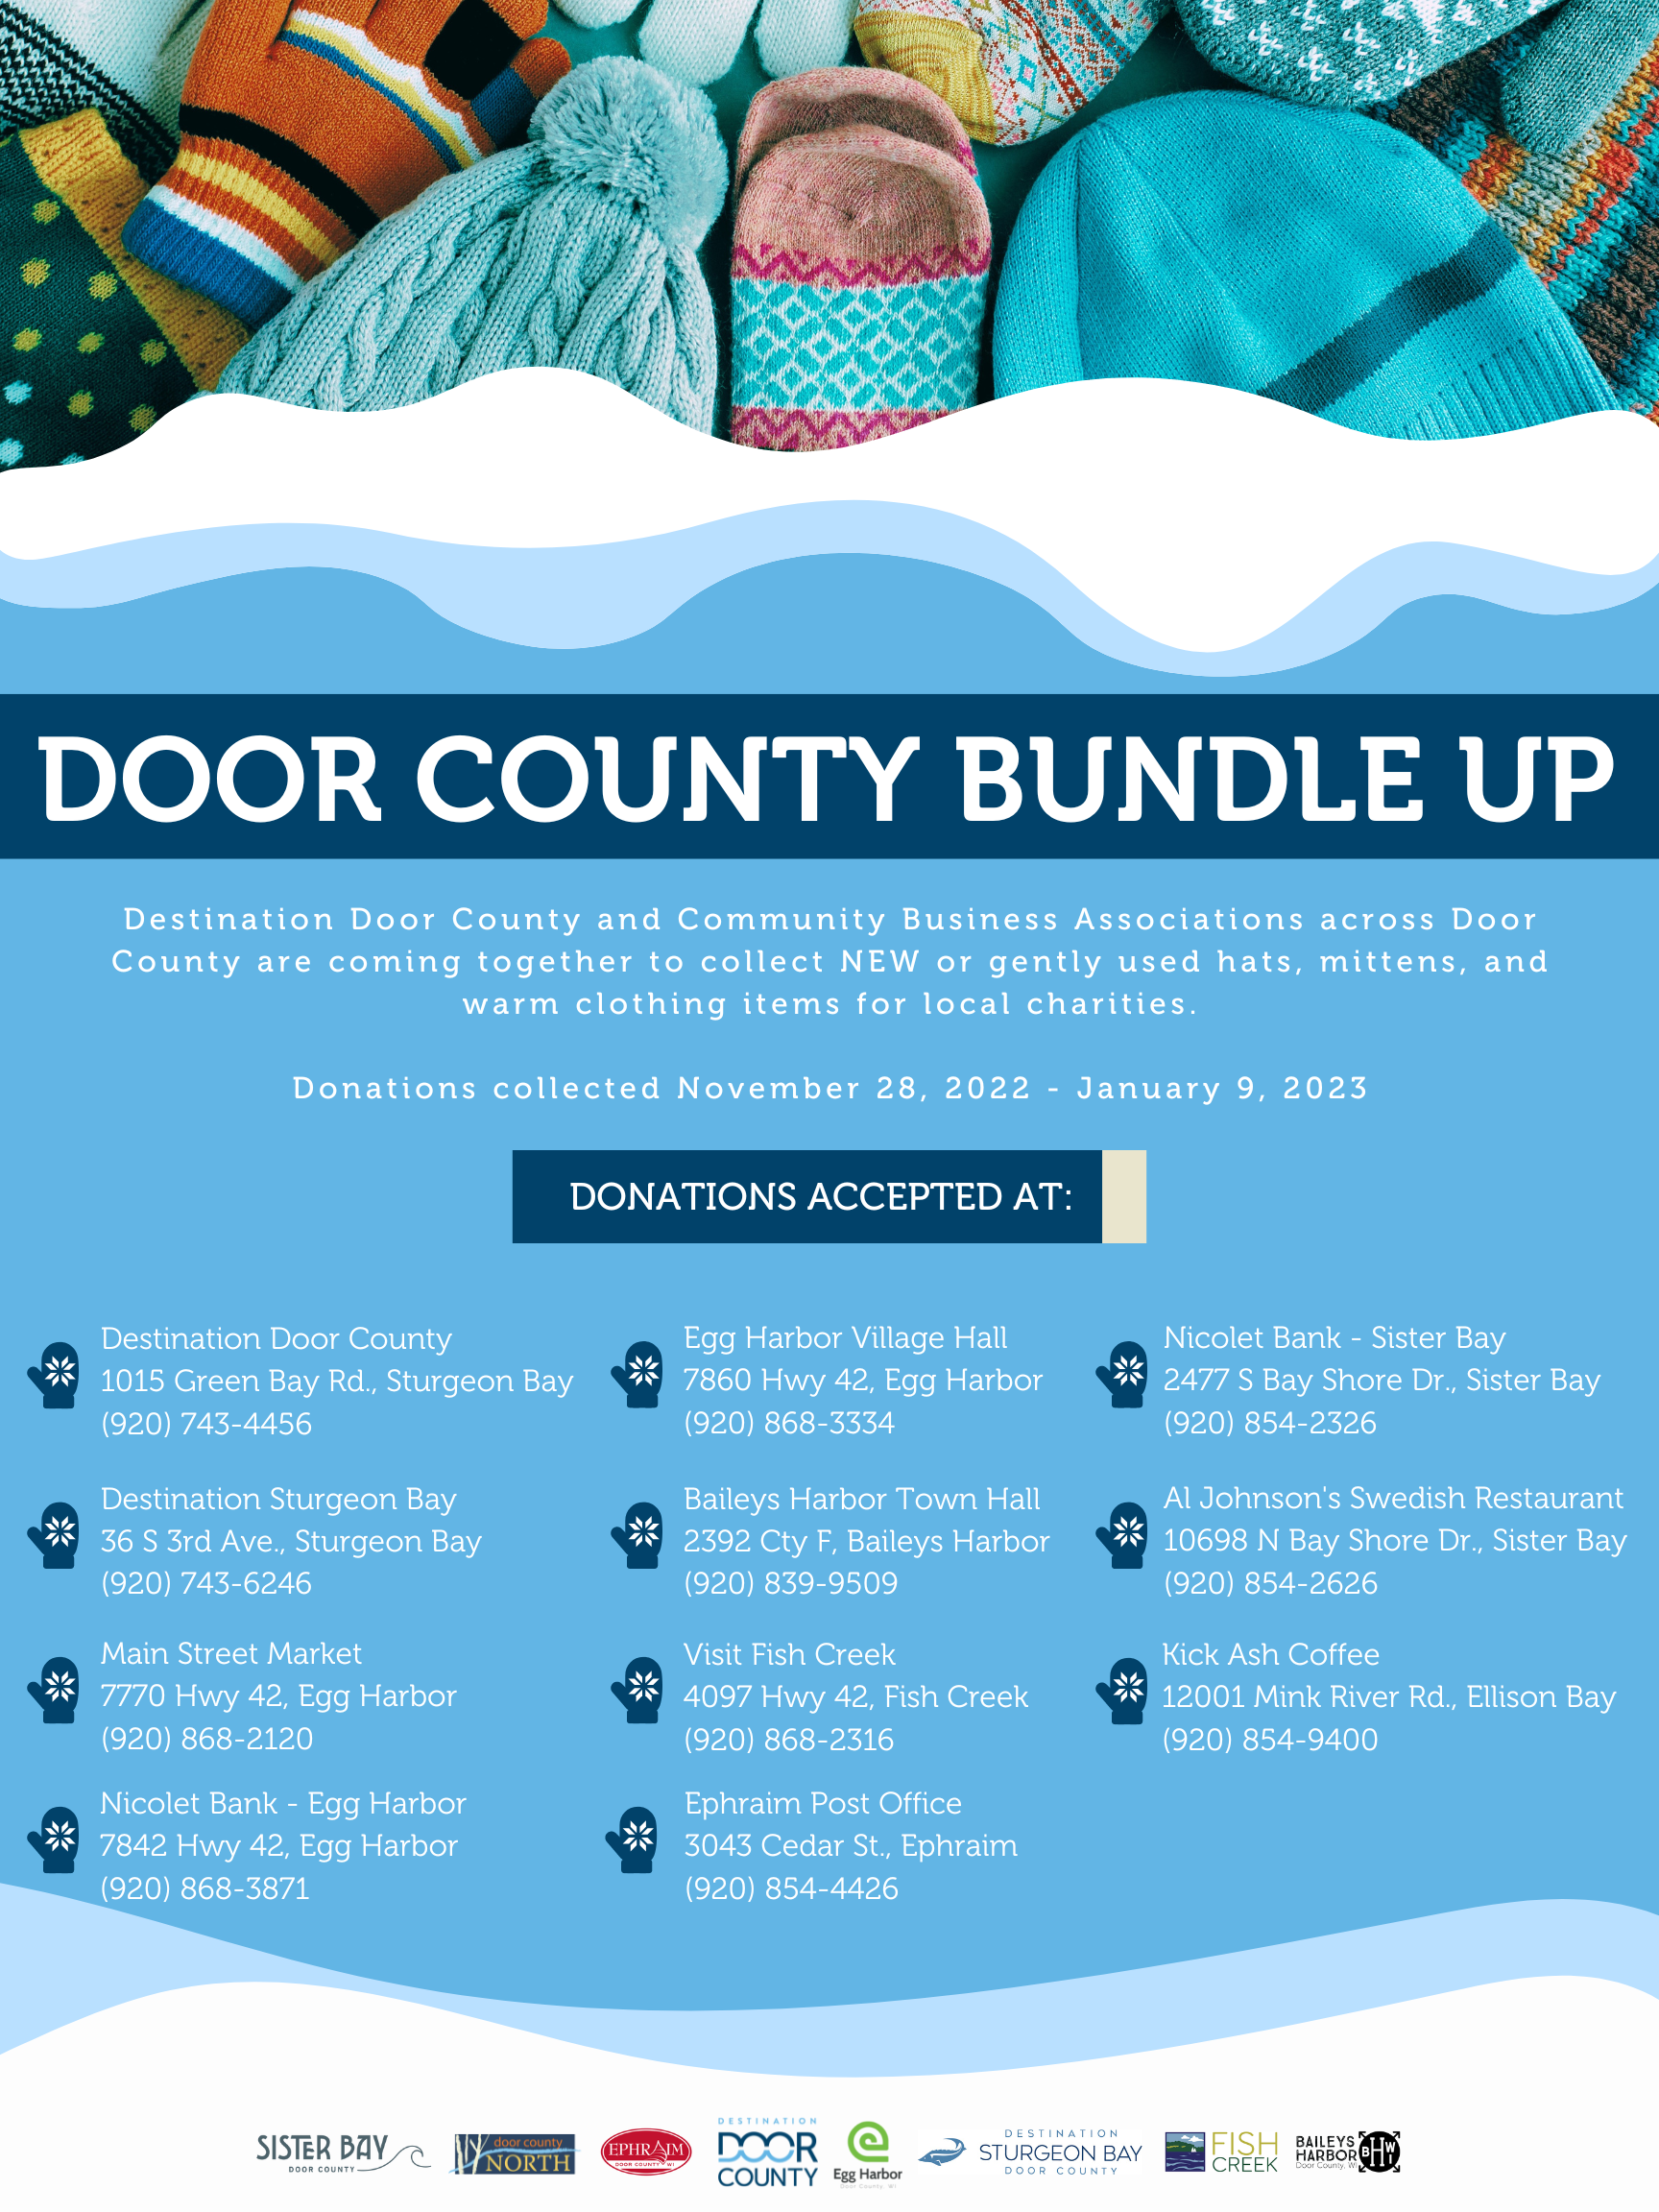 Bundle-Up-Locations-image-(updated).png